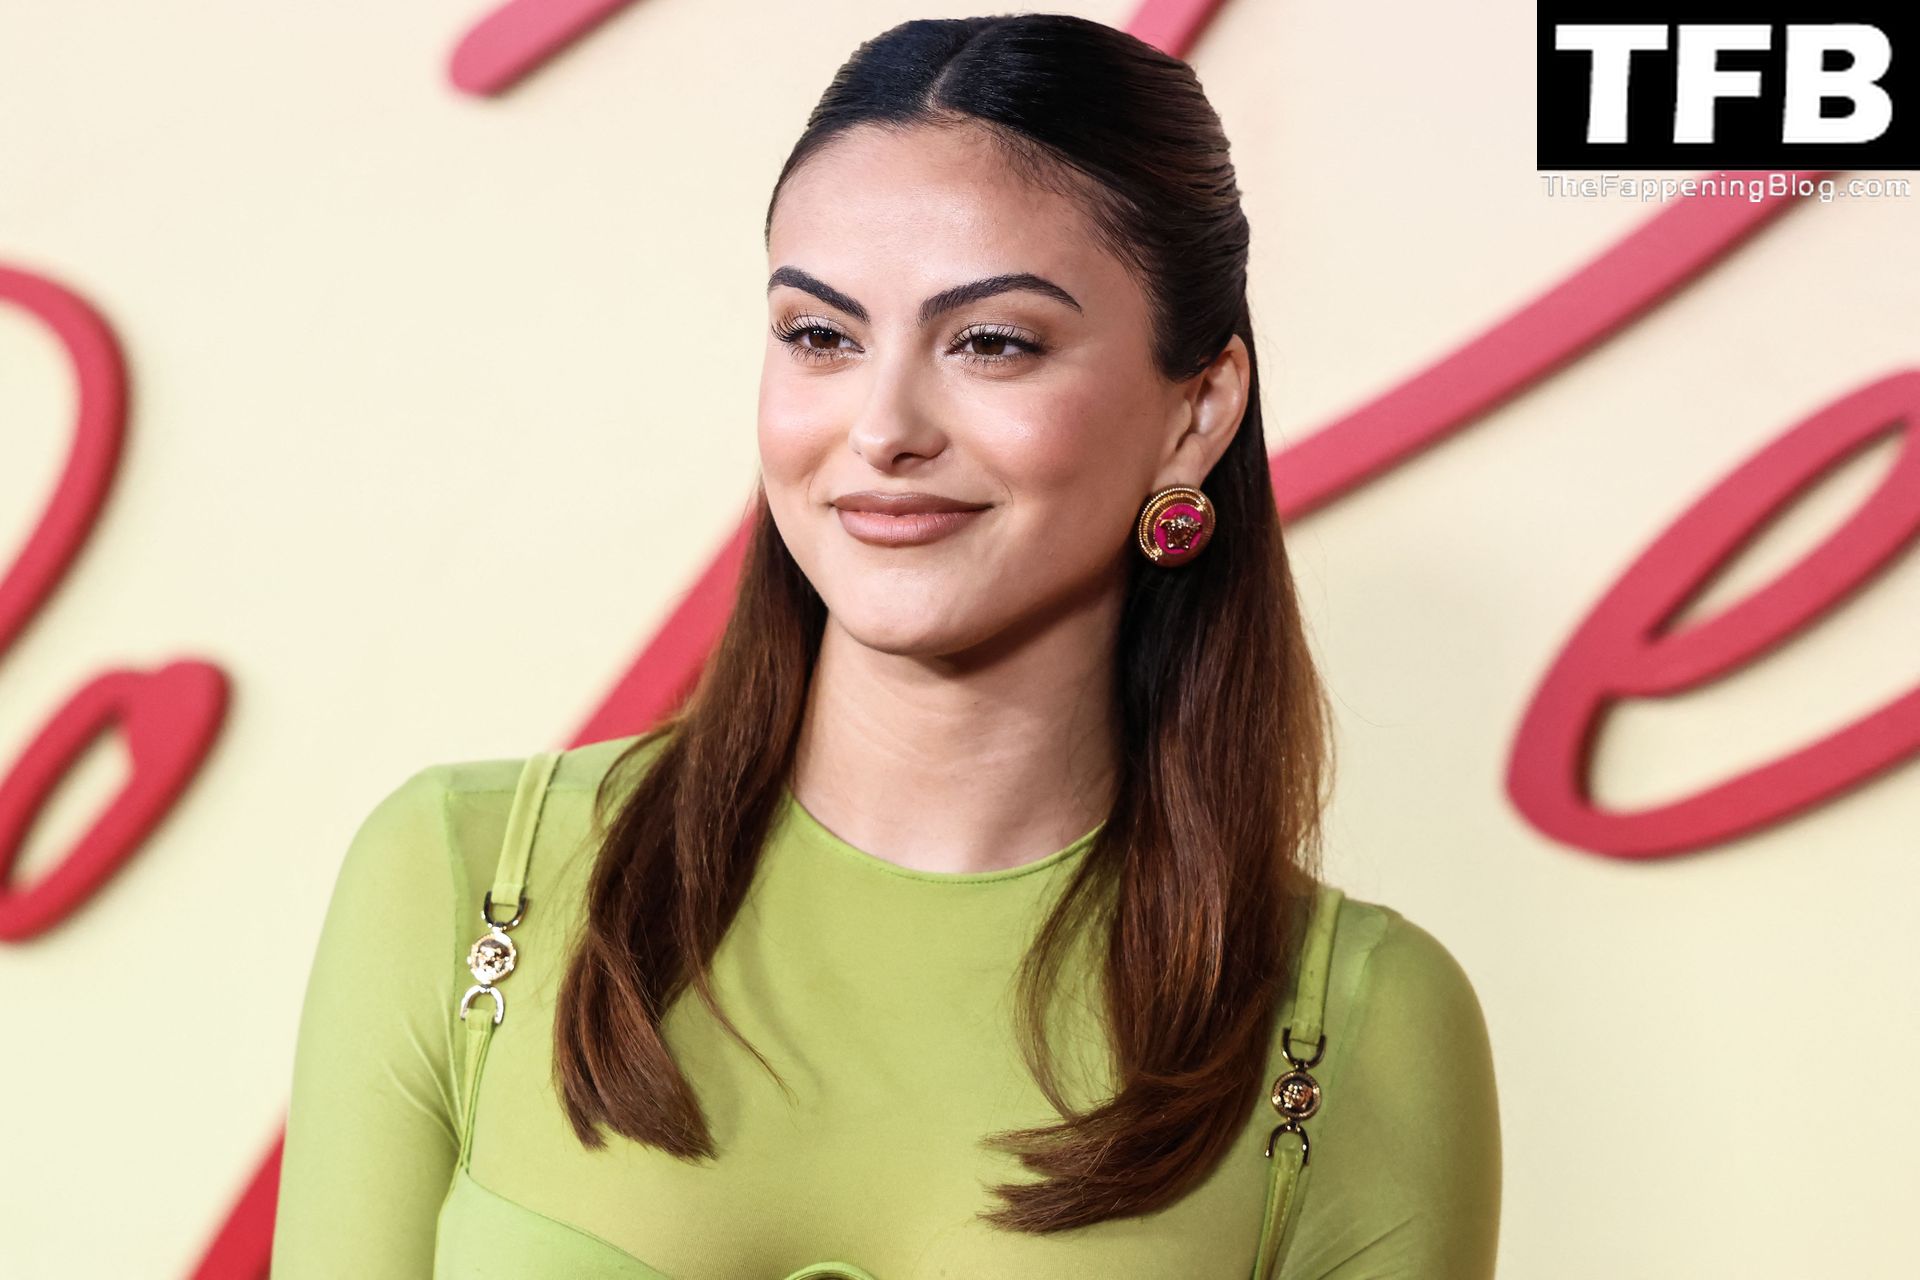 Camila-Mendes-Sexy-The-Fappening-Blog-128.jpg